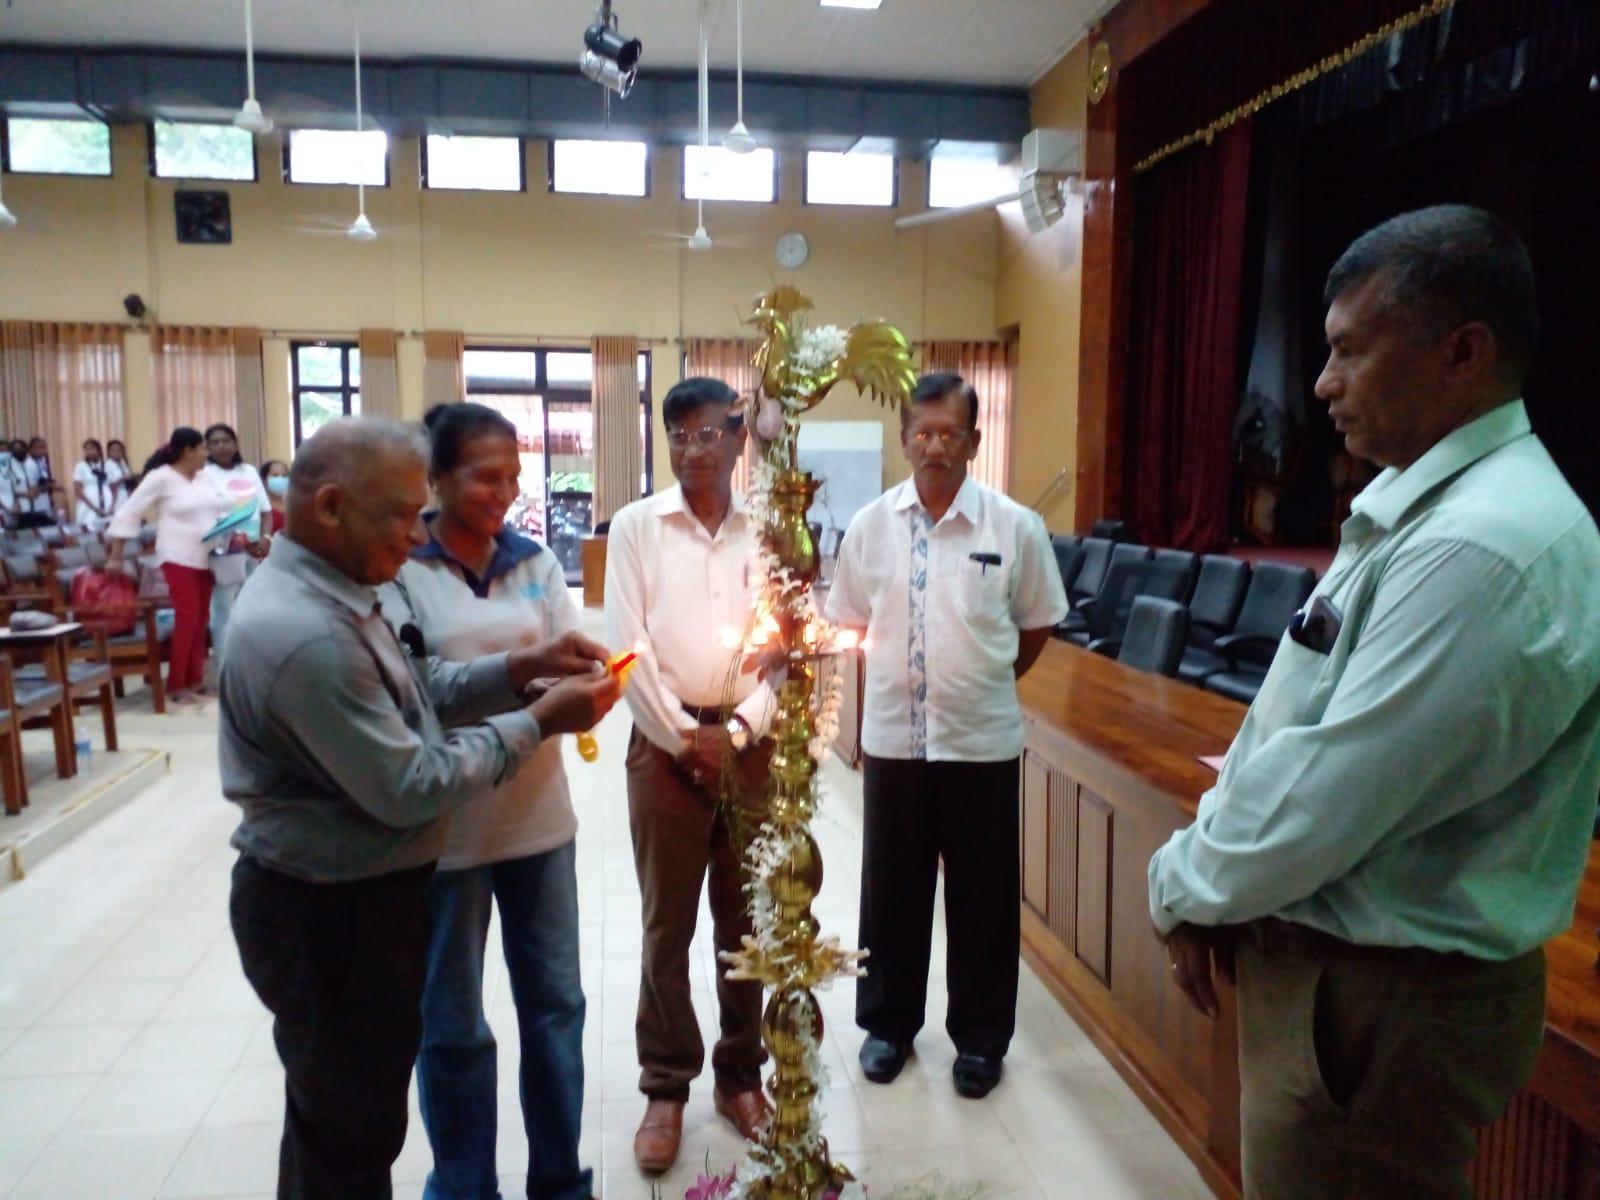 Workshop on food security management and cookery in Sri Lanka